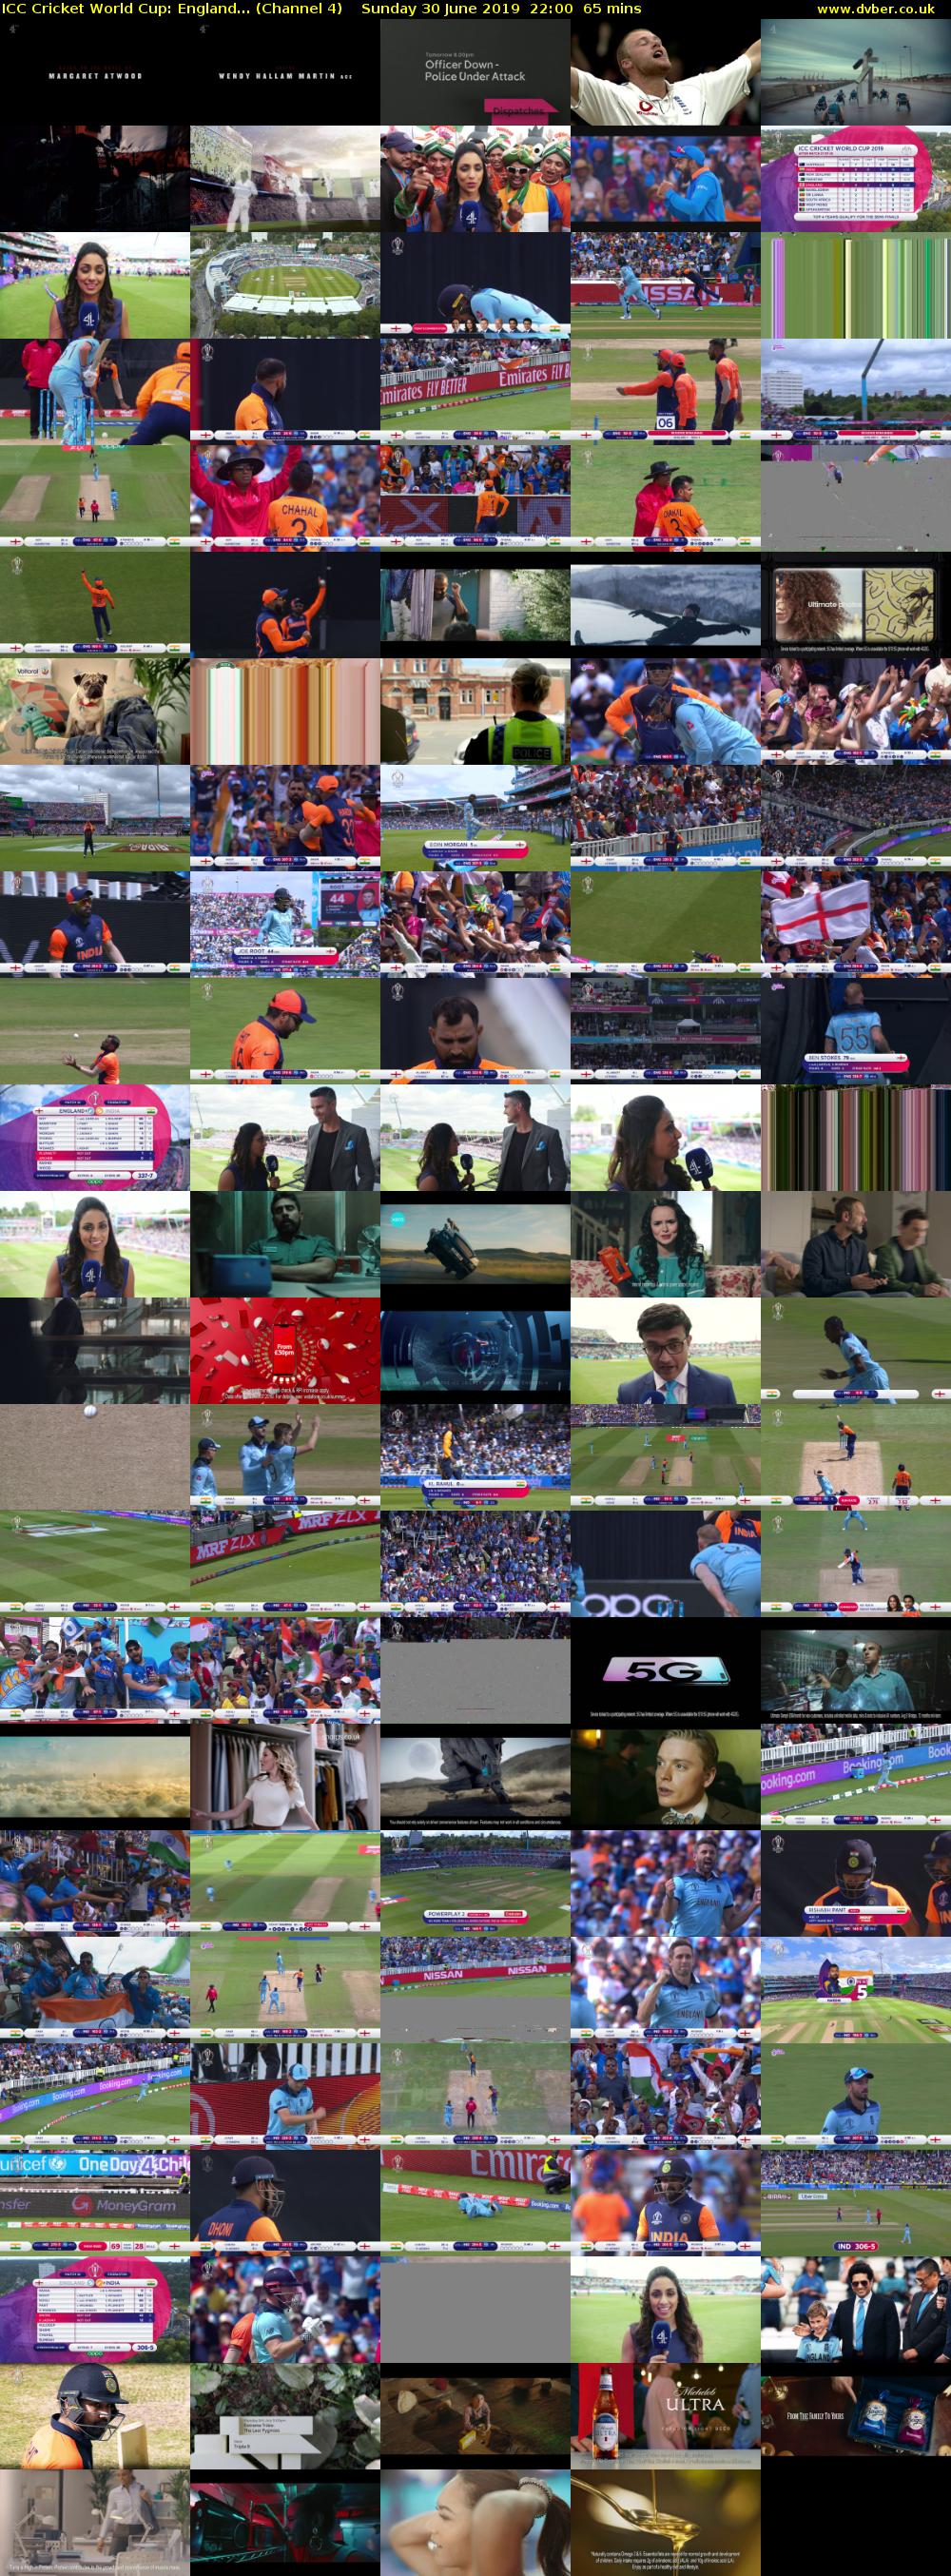 ICC Cricket World Cup: England... (Channel 4) Sunday 30 June 2019 22:00 - 23:05